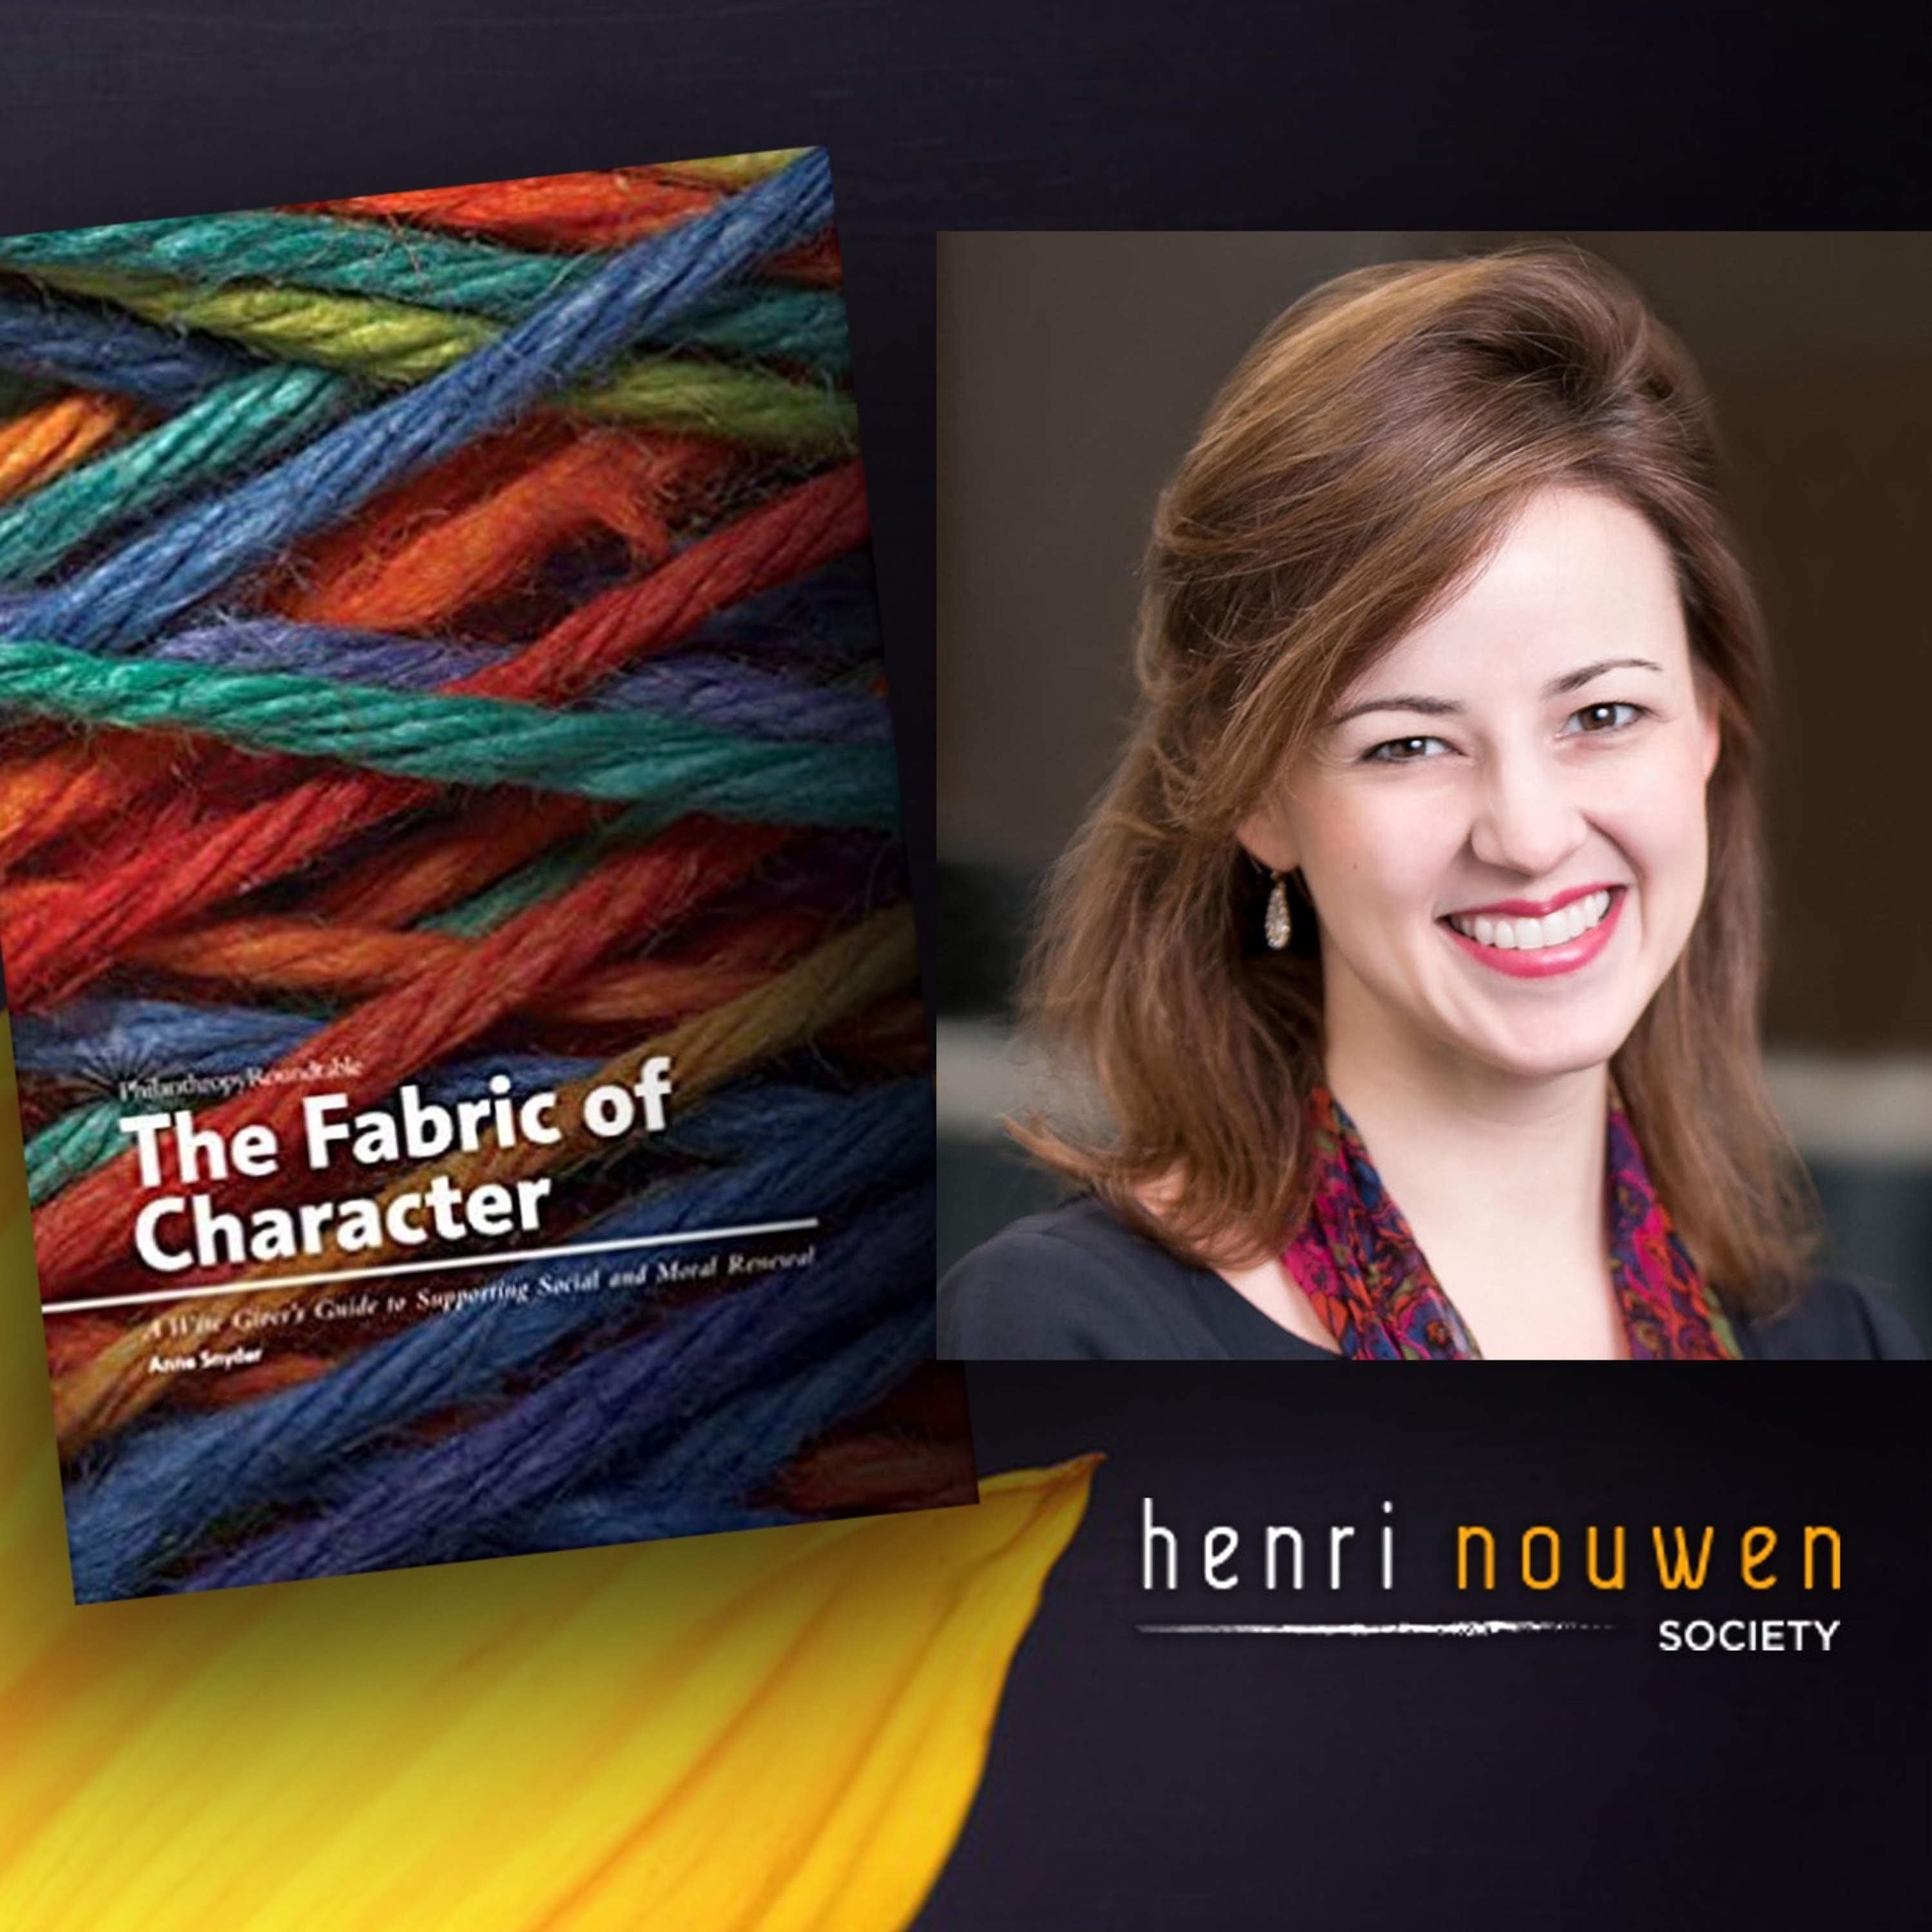 Henri Nouwen, Now & Then | Anne Snyder, The Fabric of Character